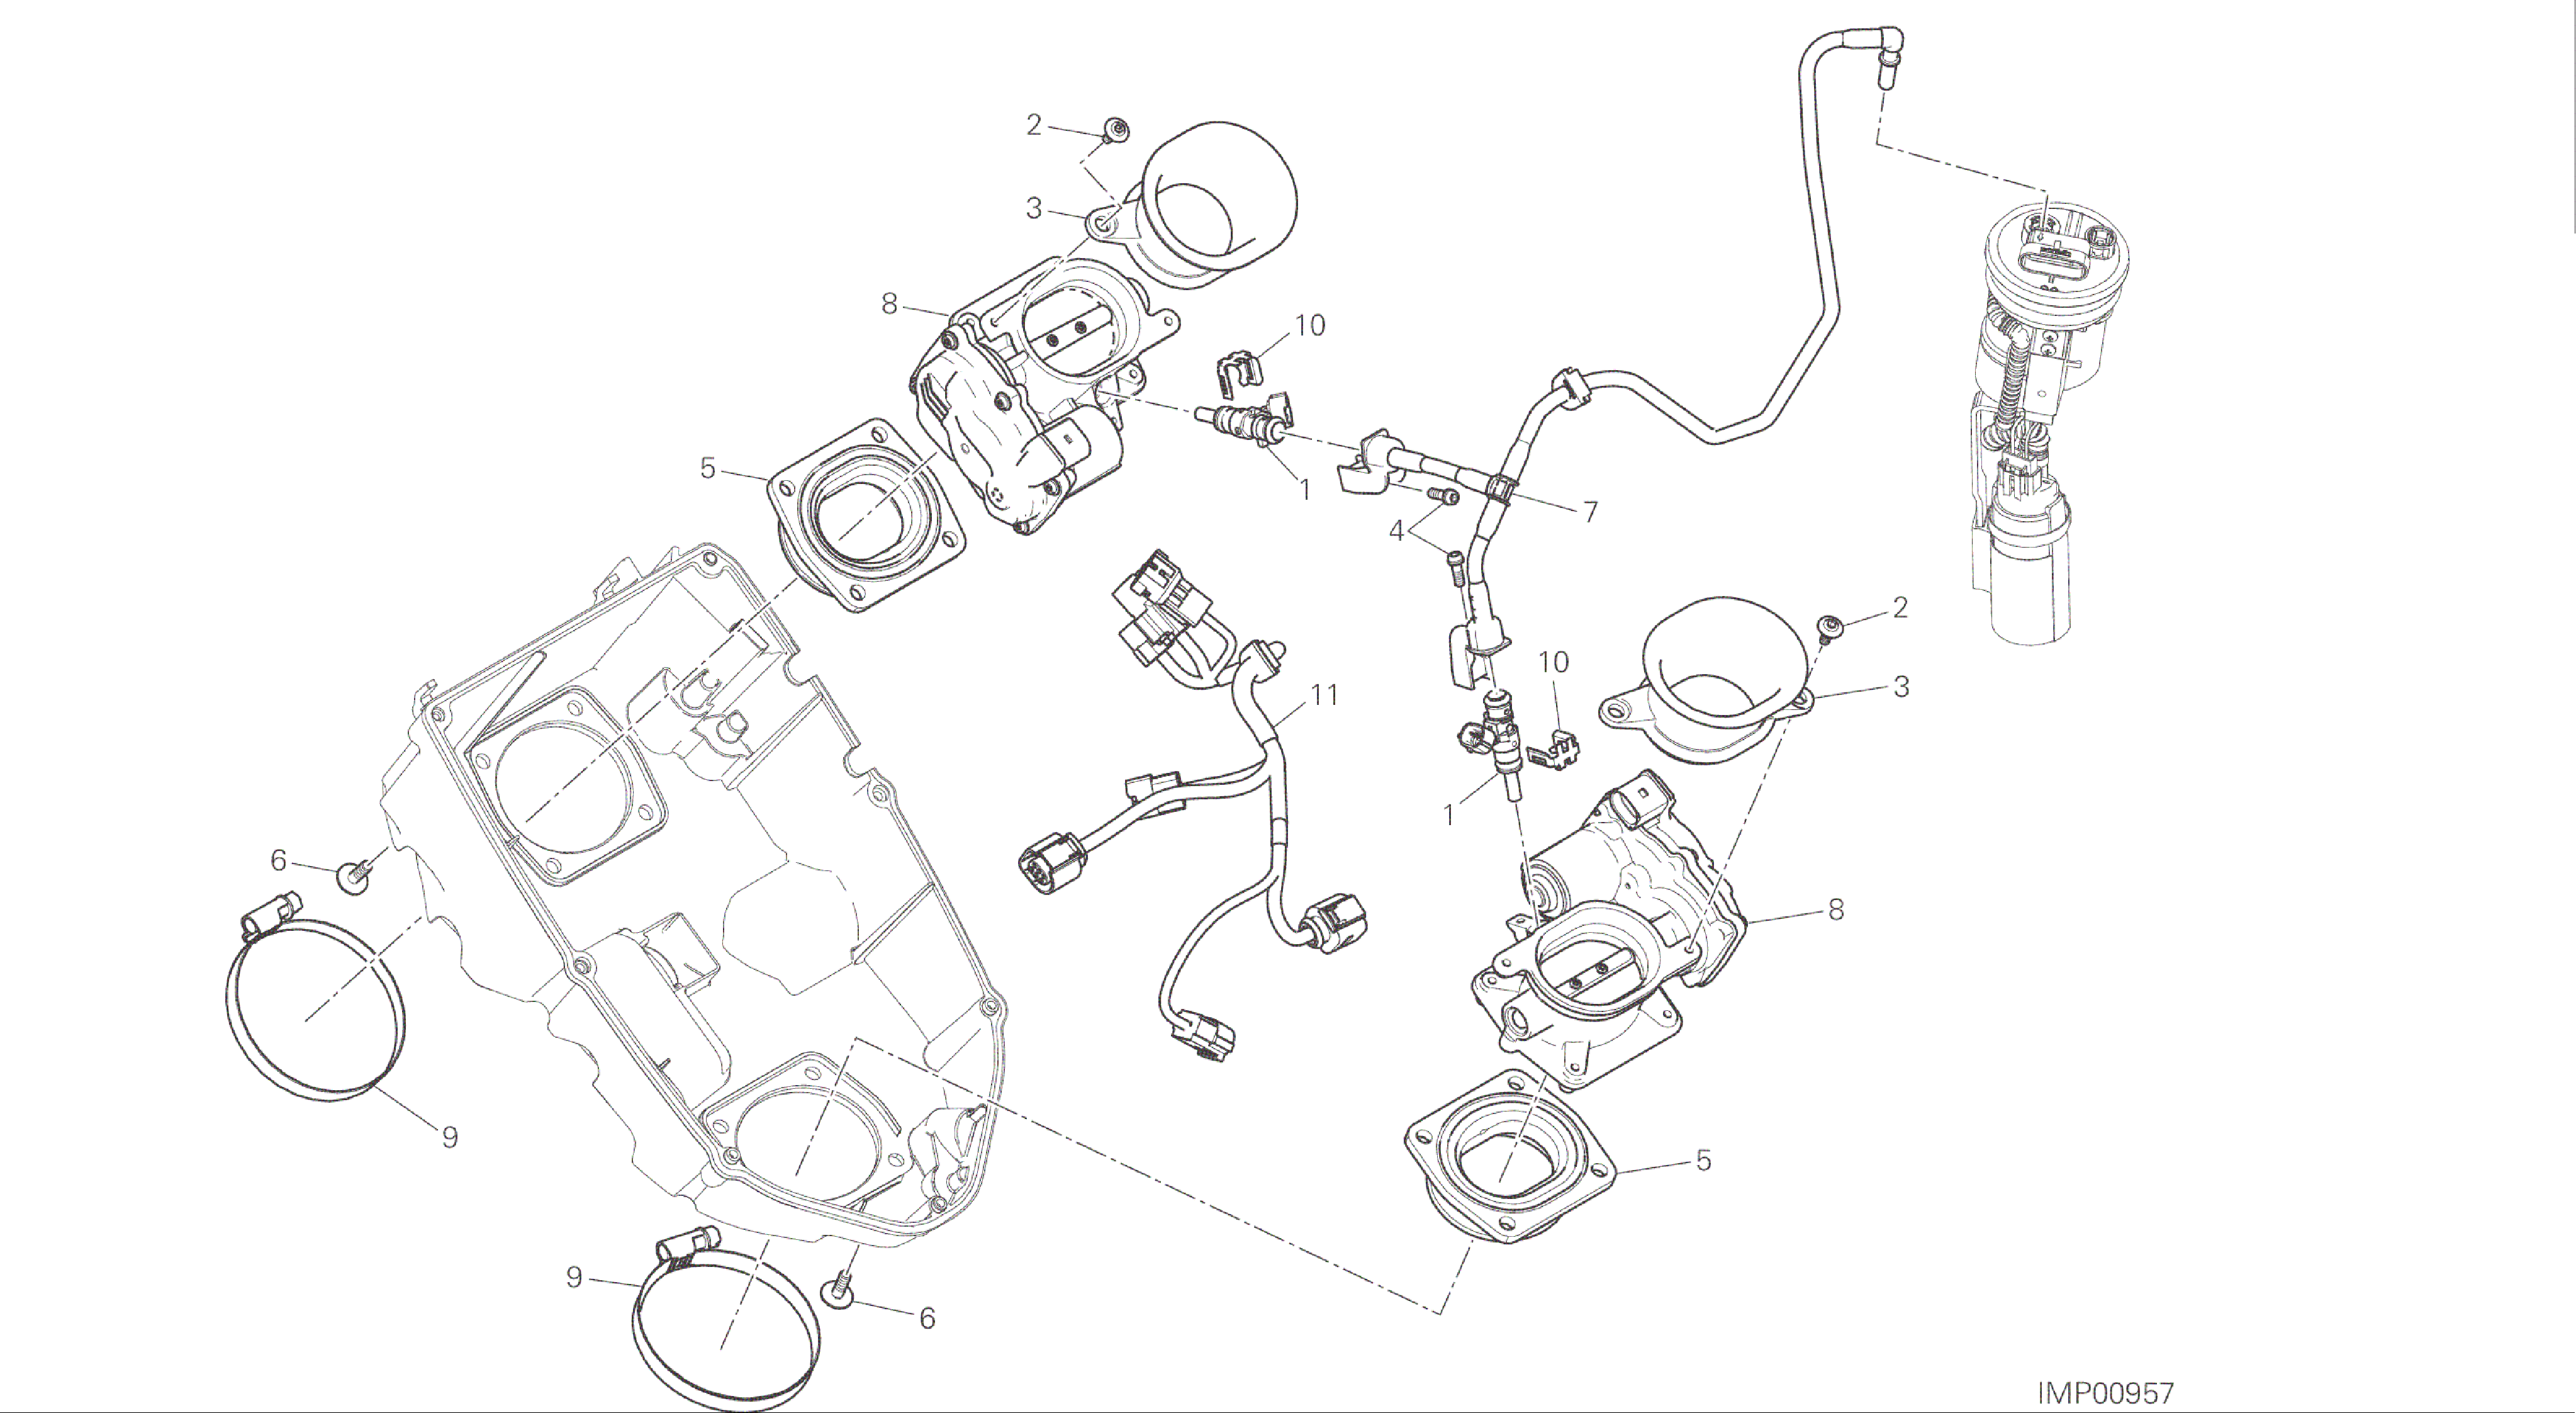 DRAWING 017 - THROTTLE BODY [MOD:MS1200S]GROUP ENGINE